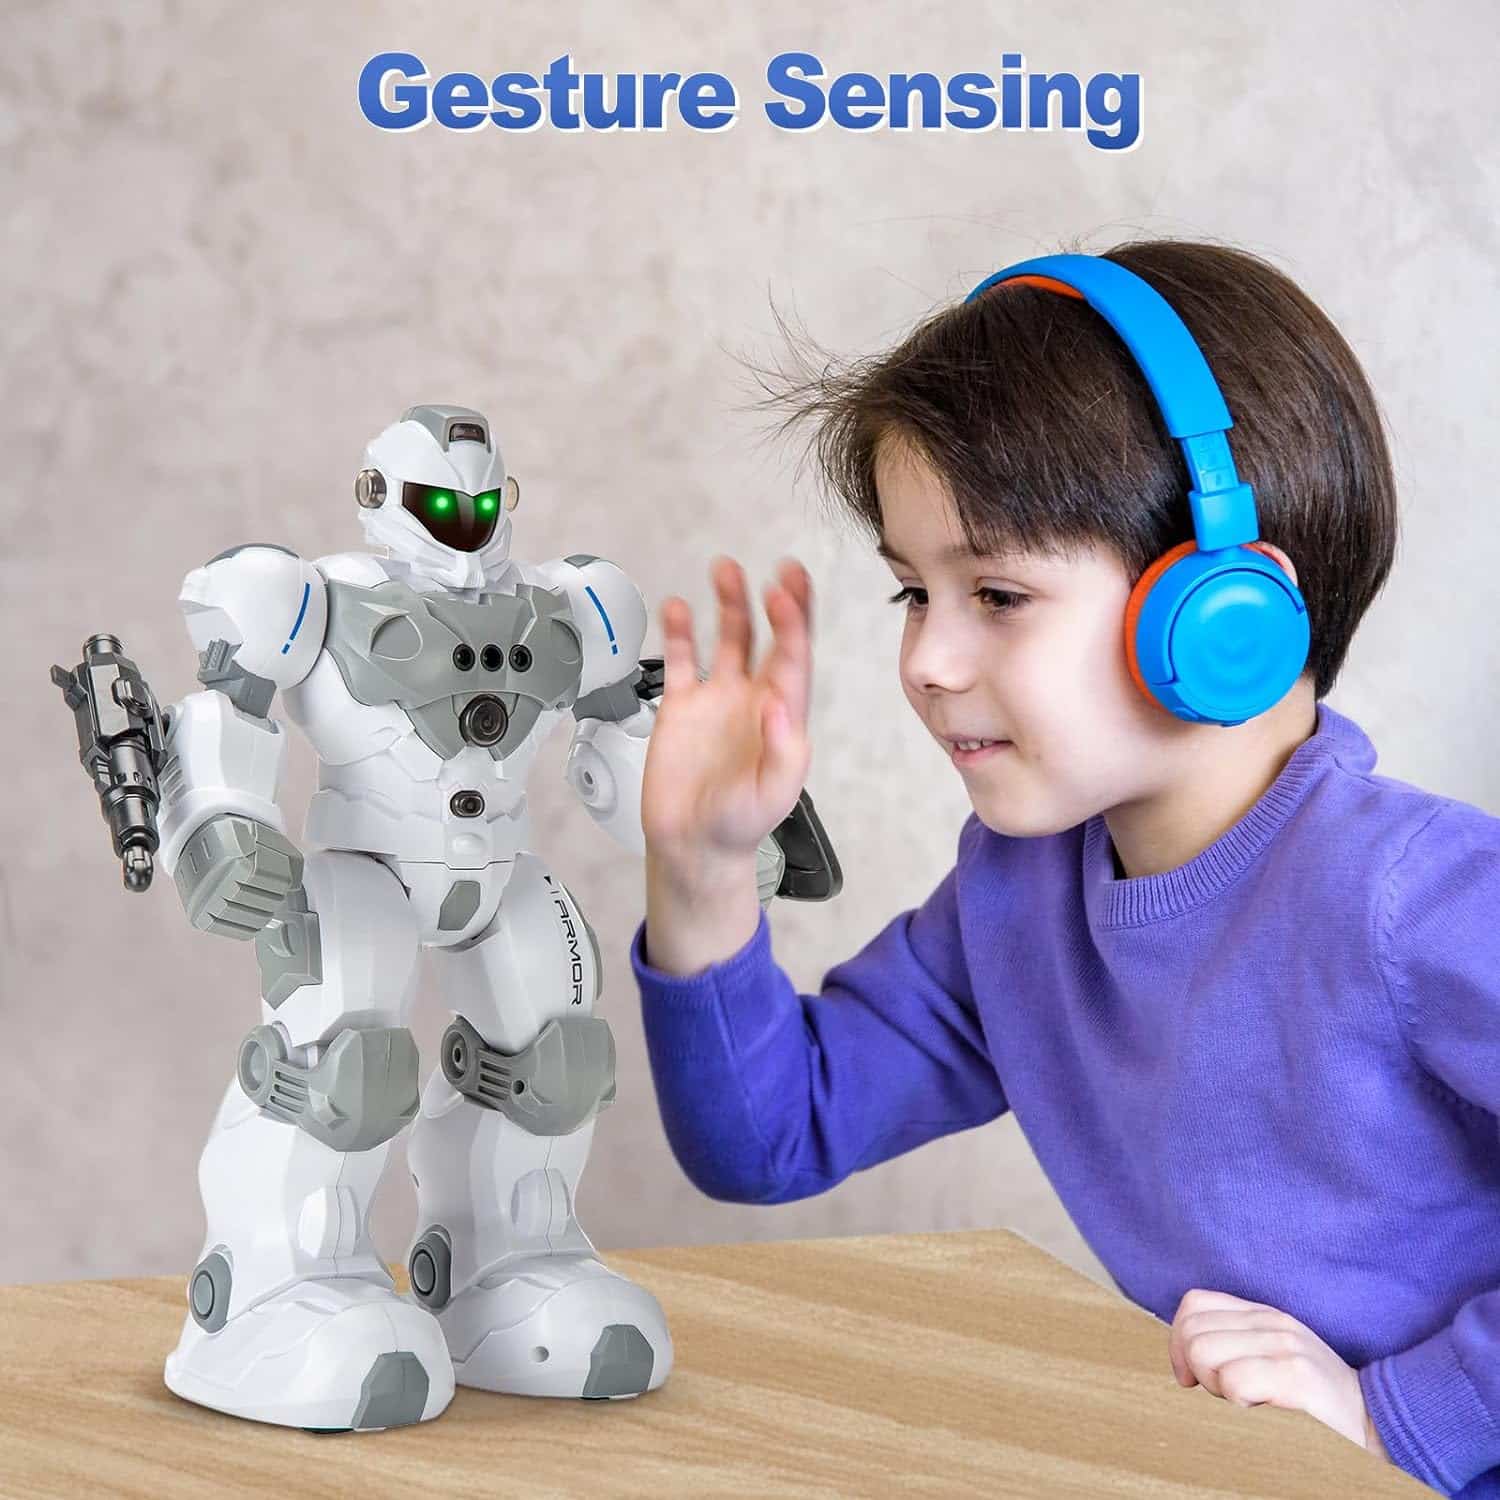 Zreswap Remote Control Robot Toys for Kids: The Perfect Gift for Endless Fun and Creativity